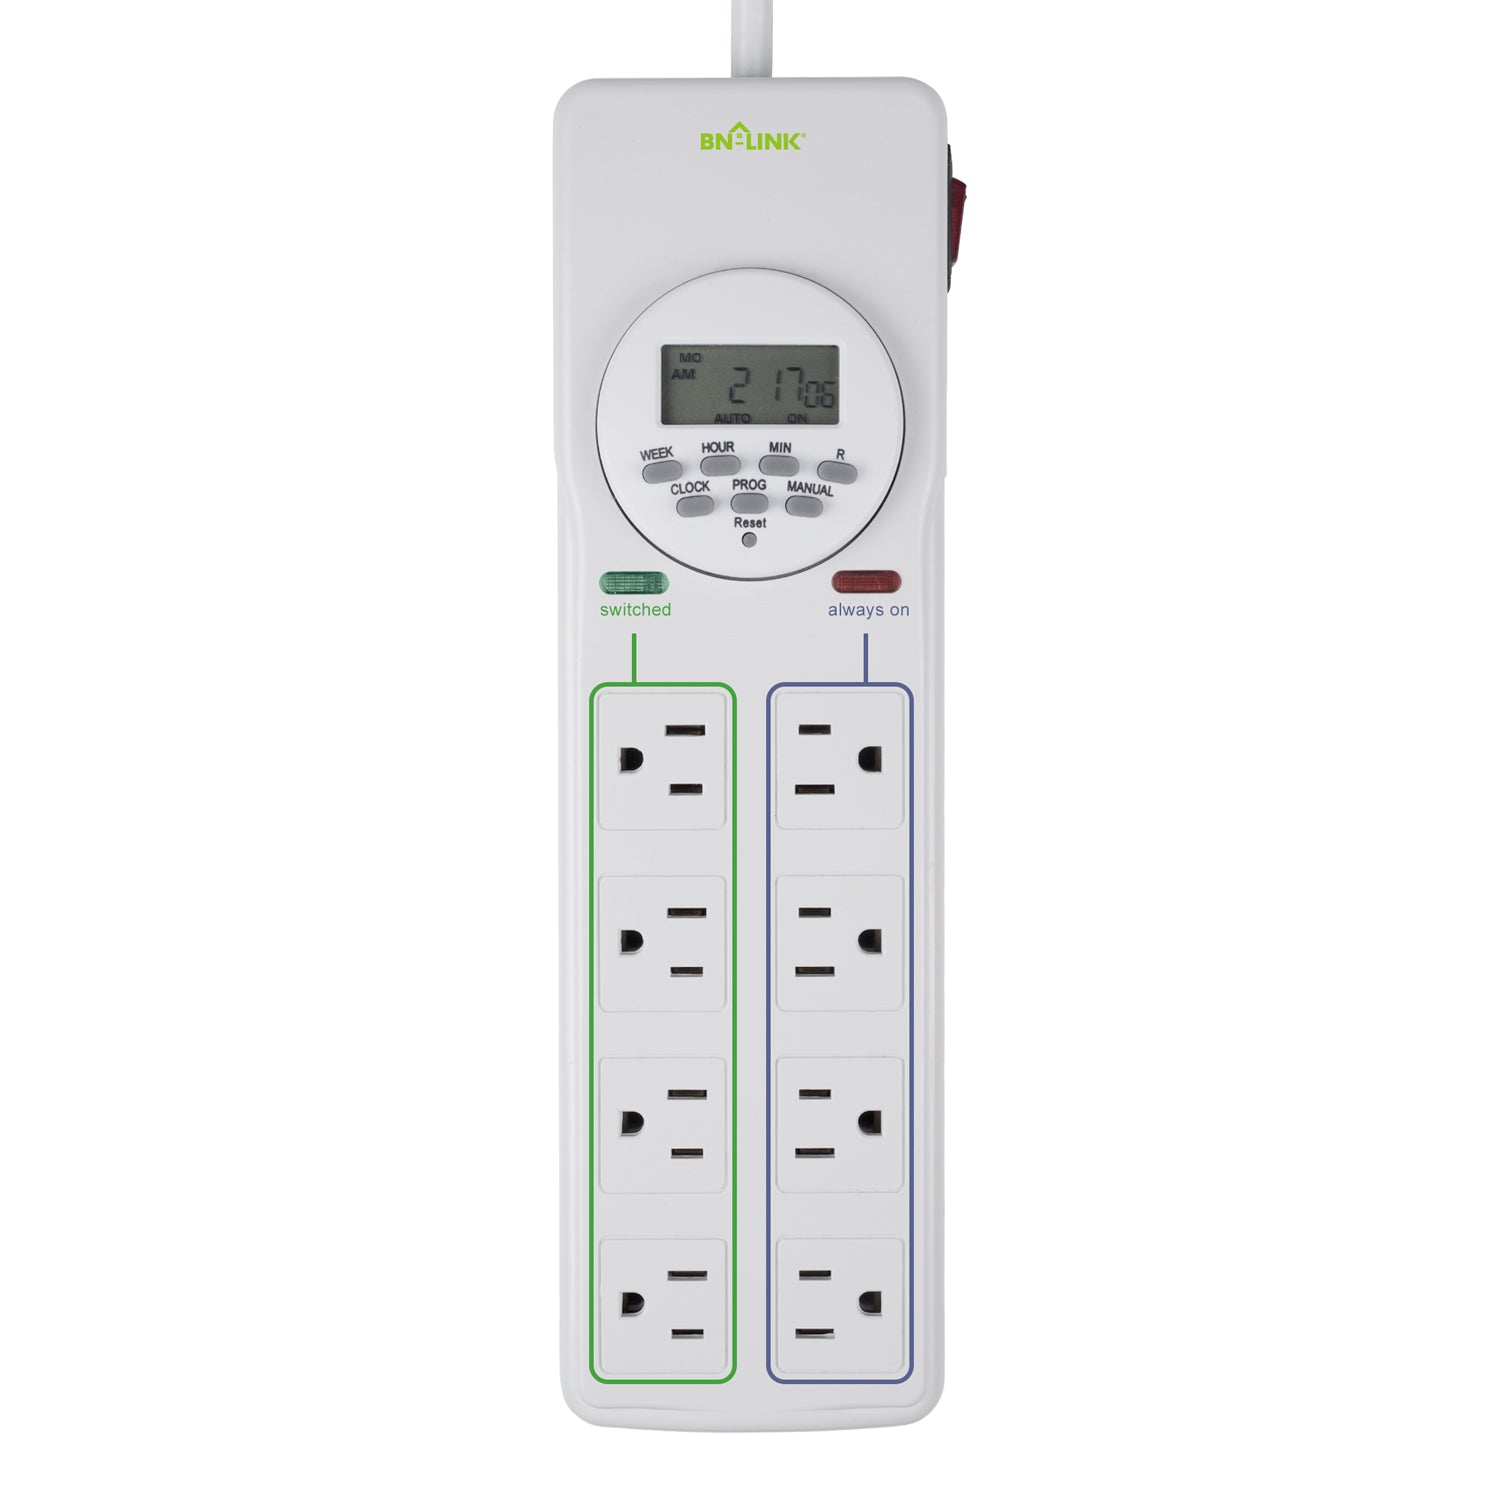 iPower Heavy Duty Digital Electric Programmable Dual Outlet Timer